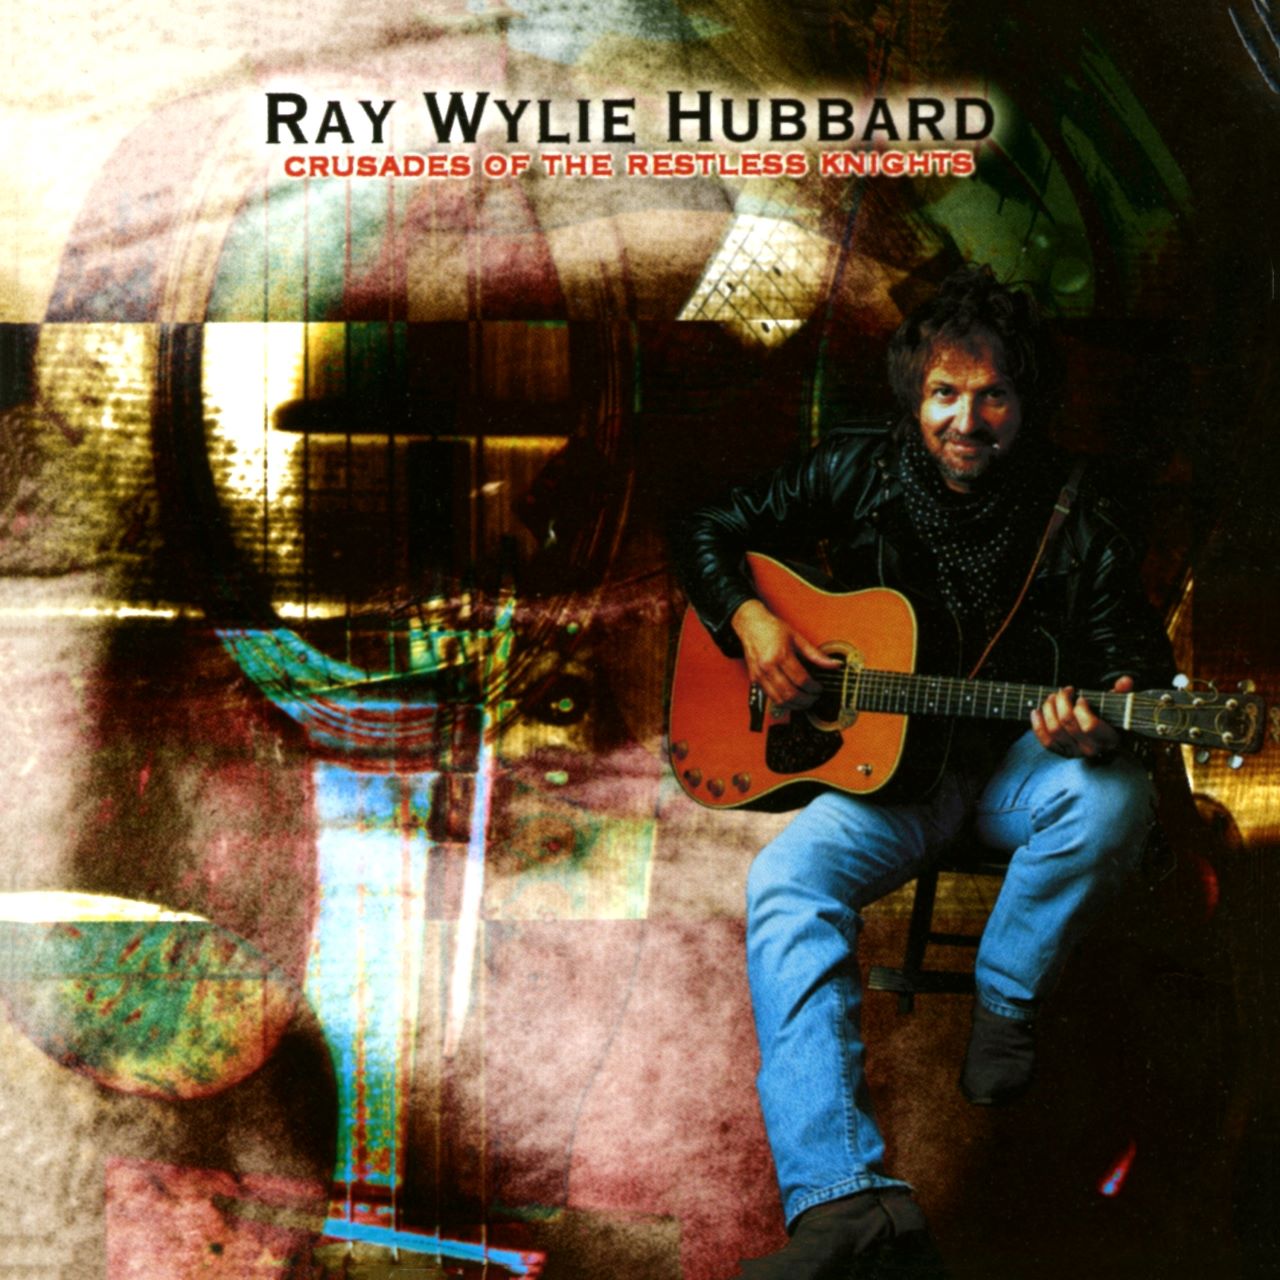 Ray Wylie Hubbard - Crusades Of The Restless Knights cover album